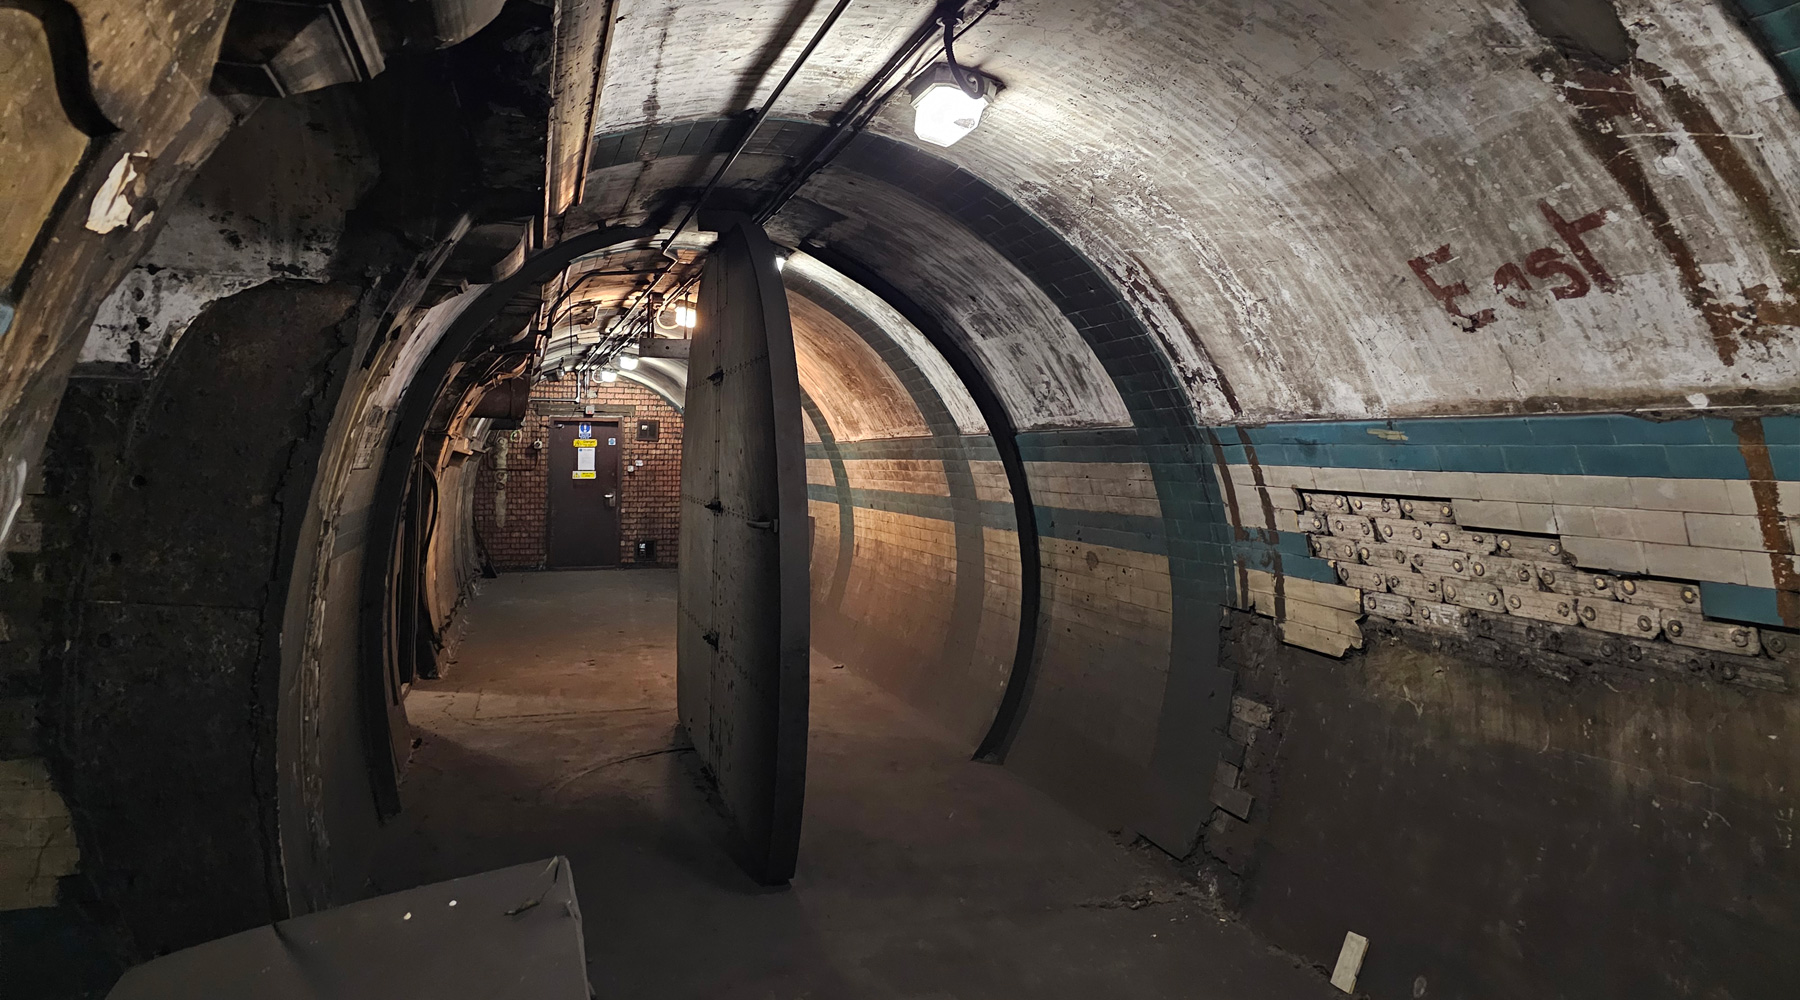 Explore Baker Street station's disused spaces in a new London